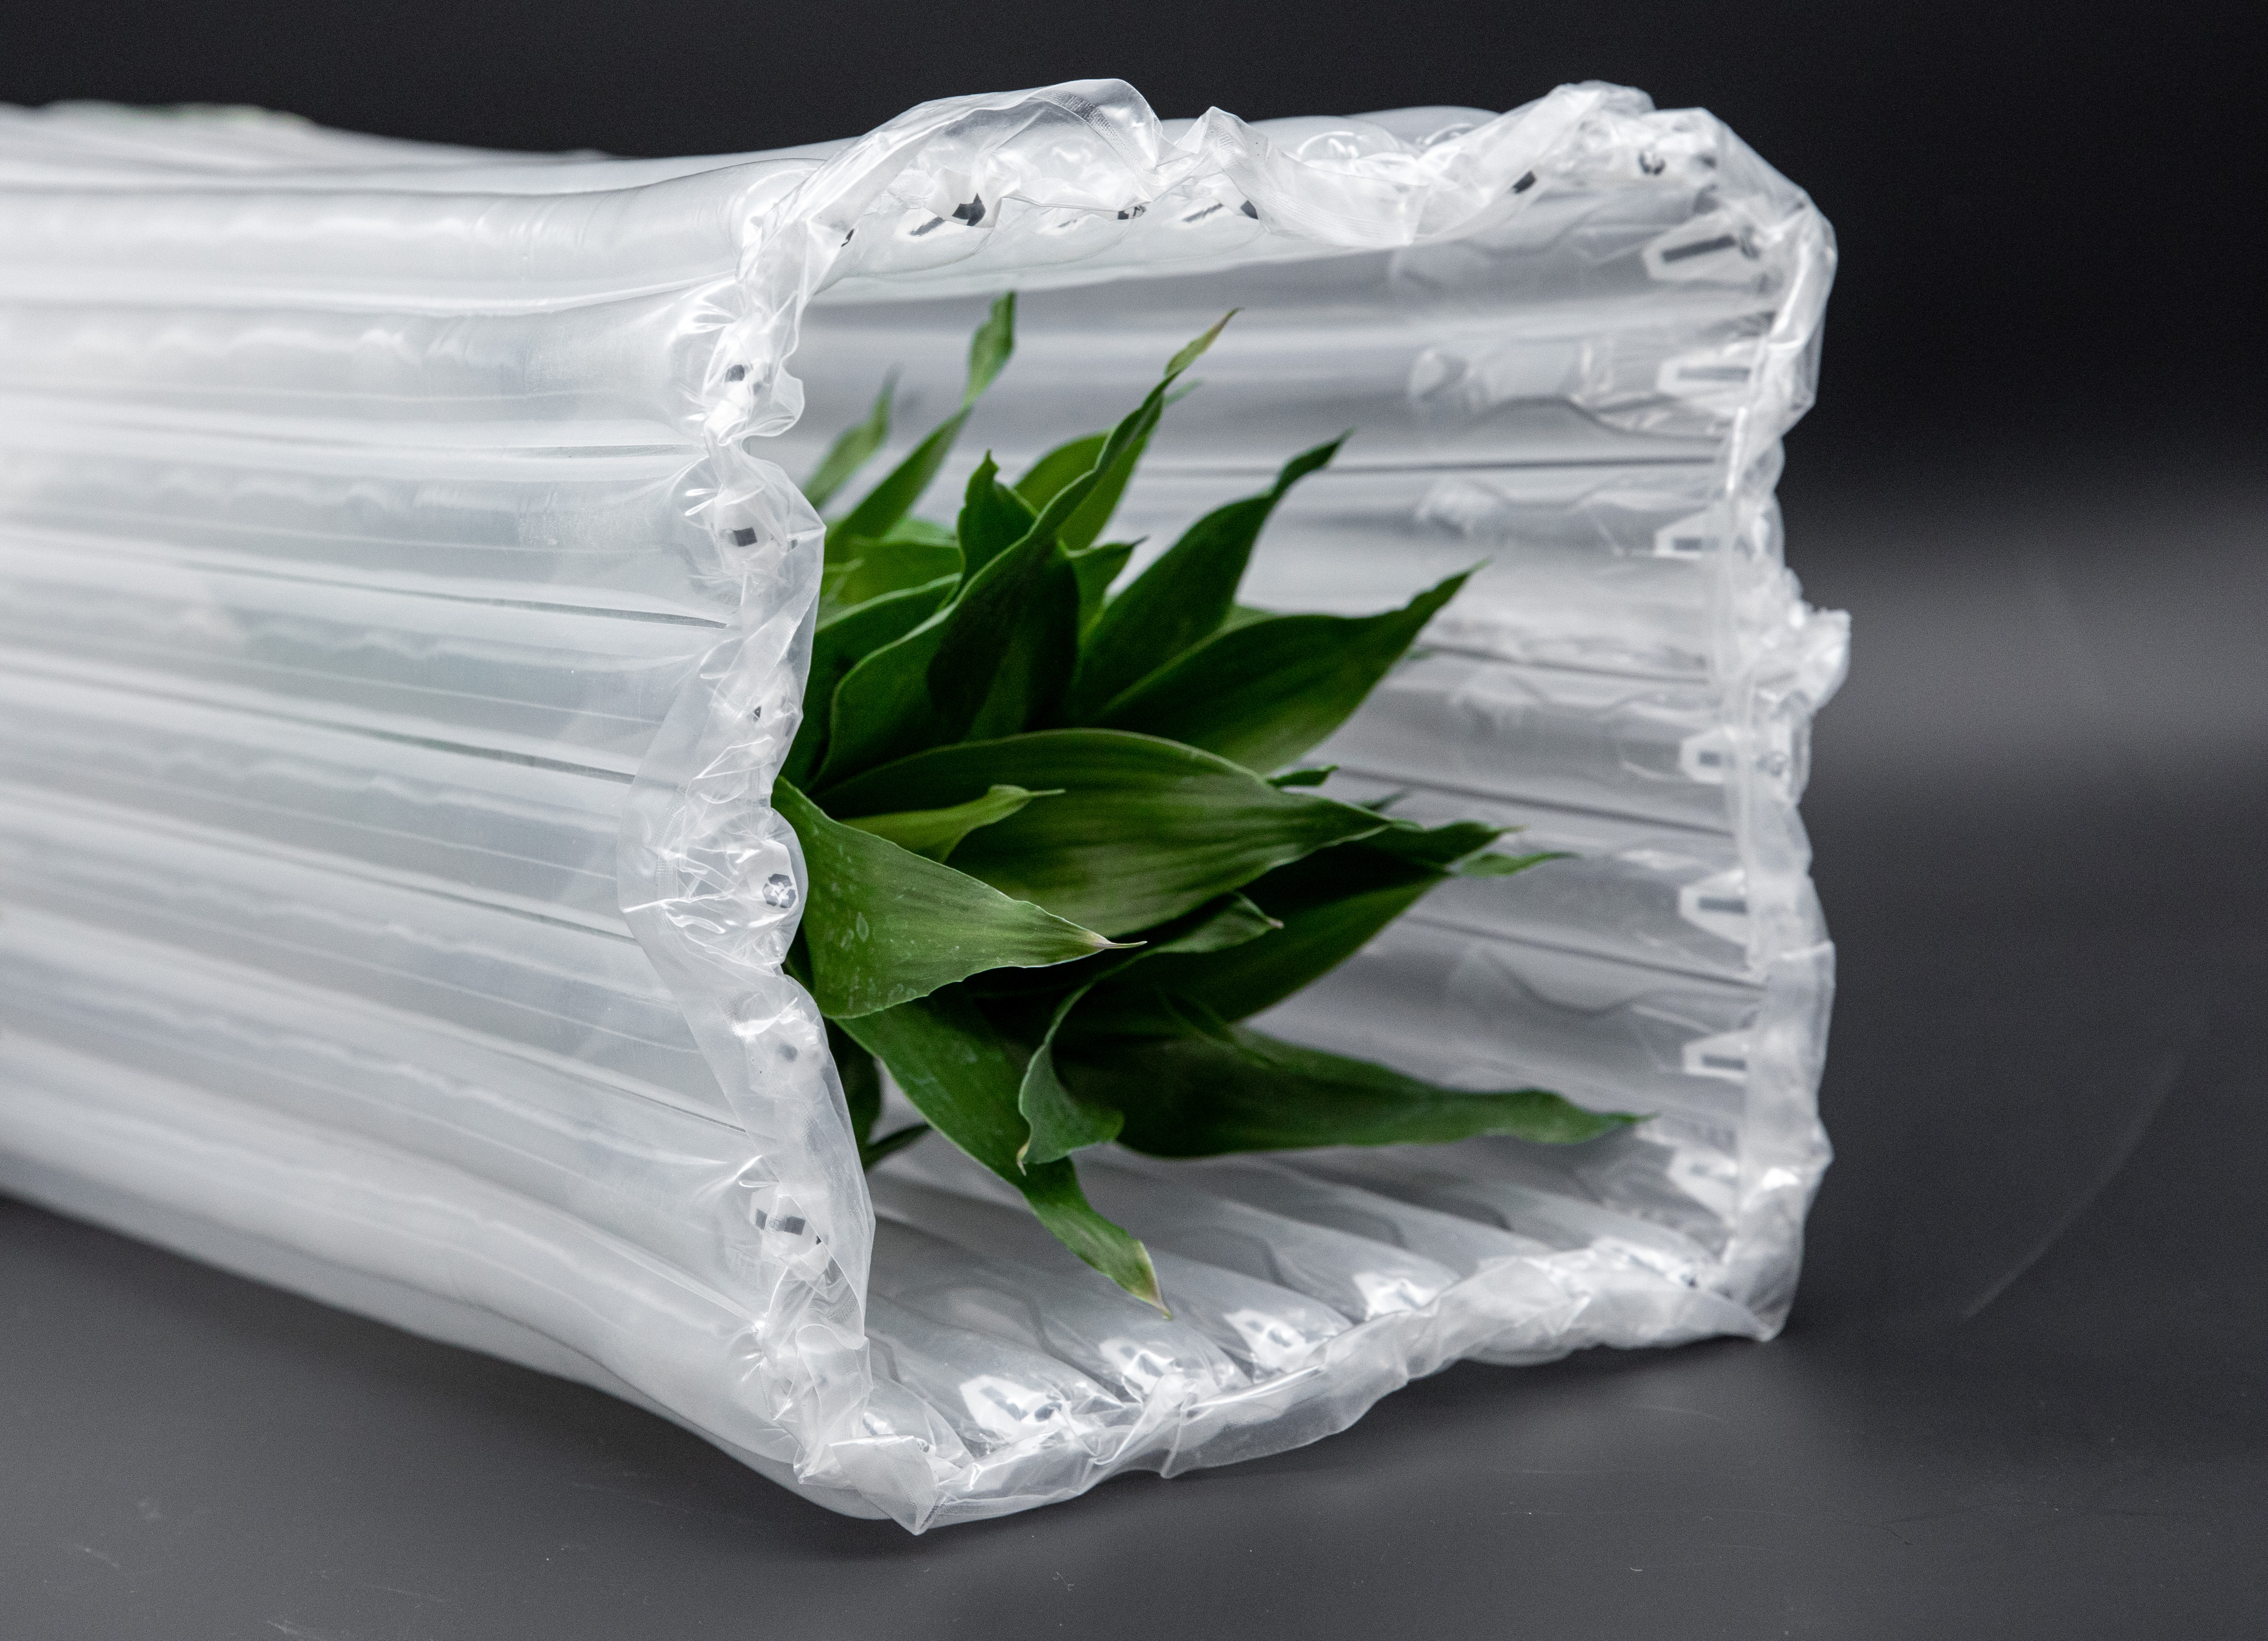 Advanced Protective Packaging Air Column Bag For Goods